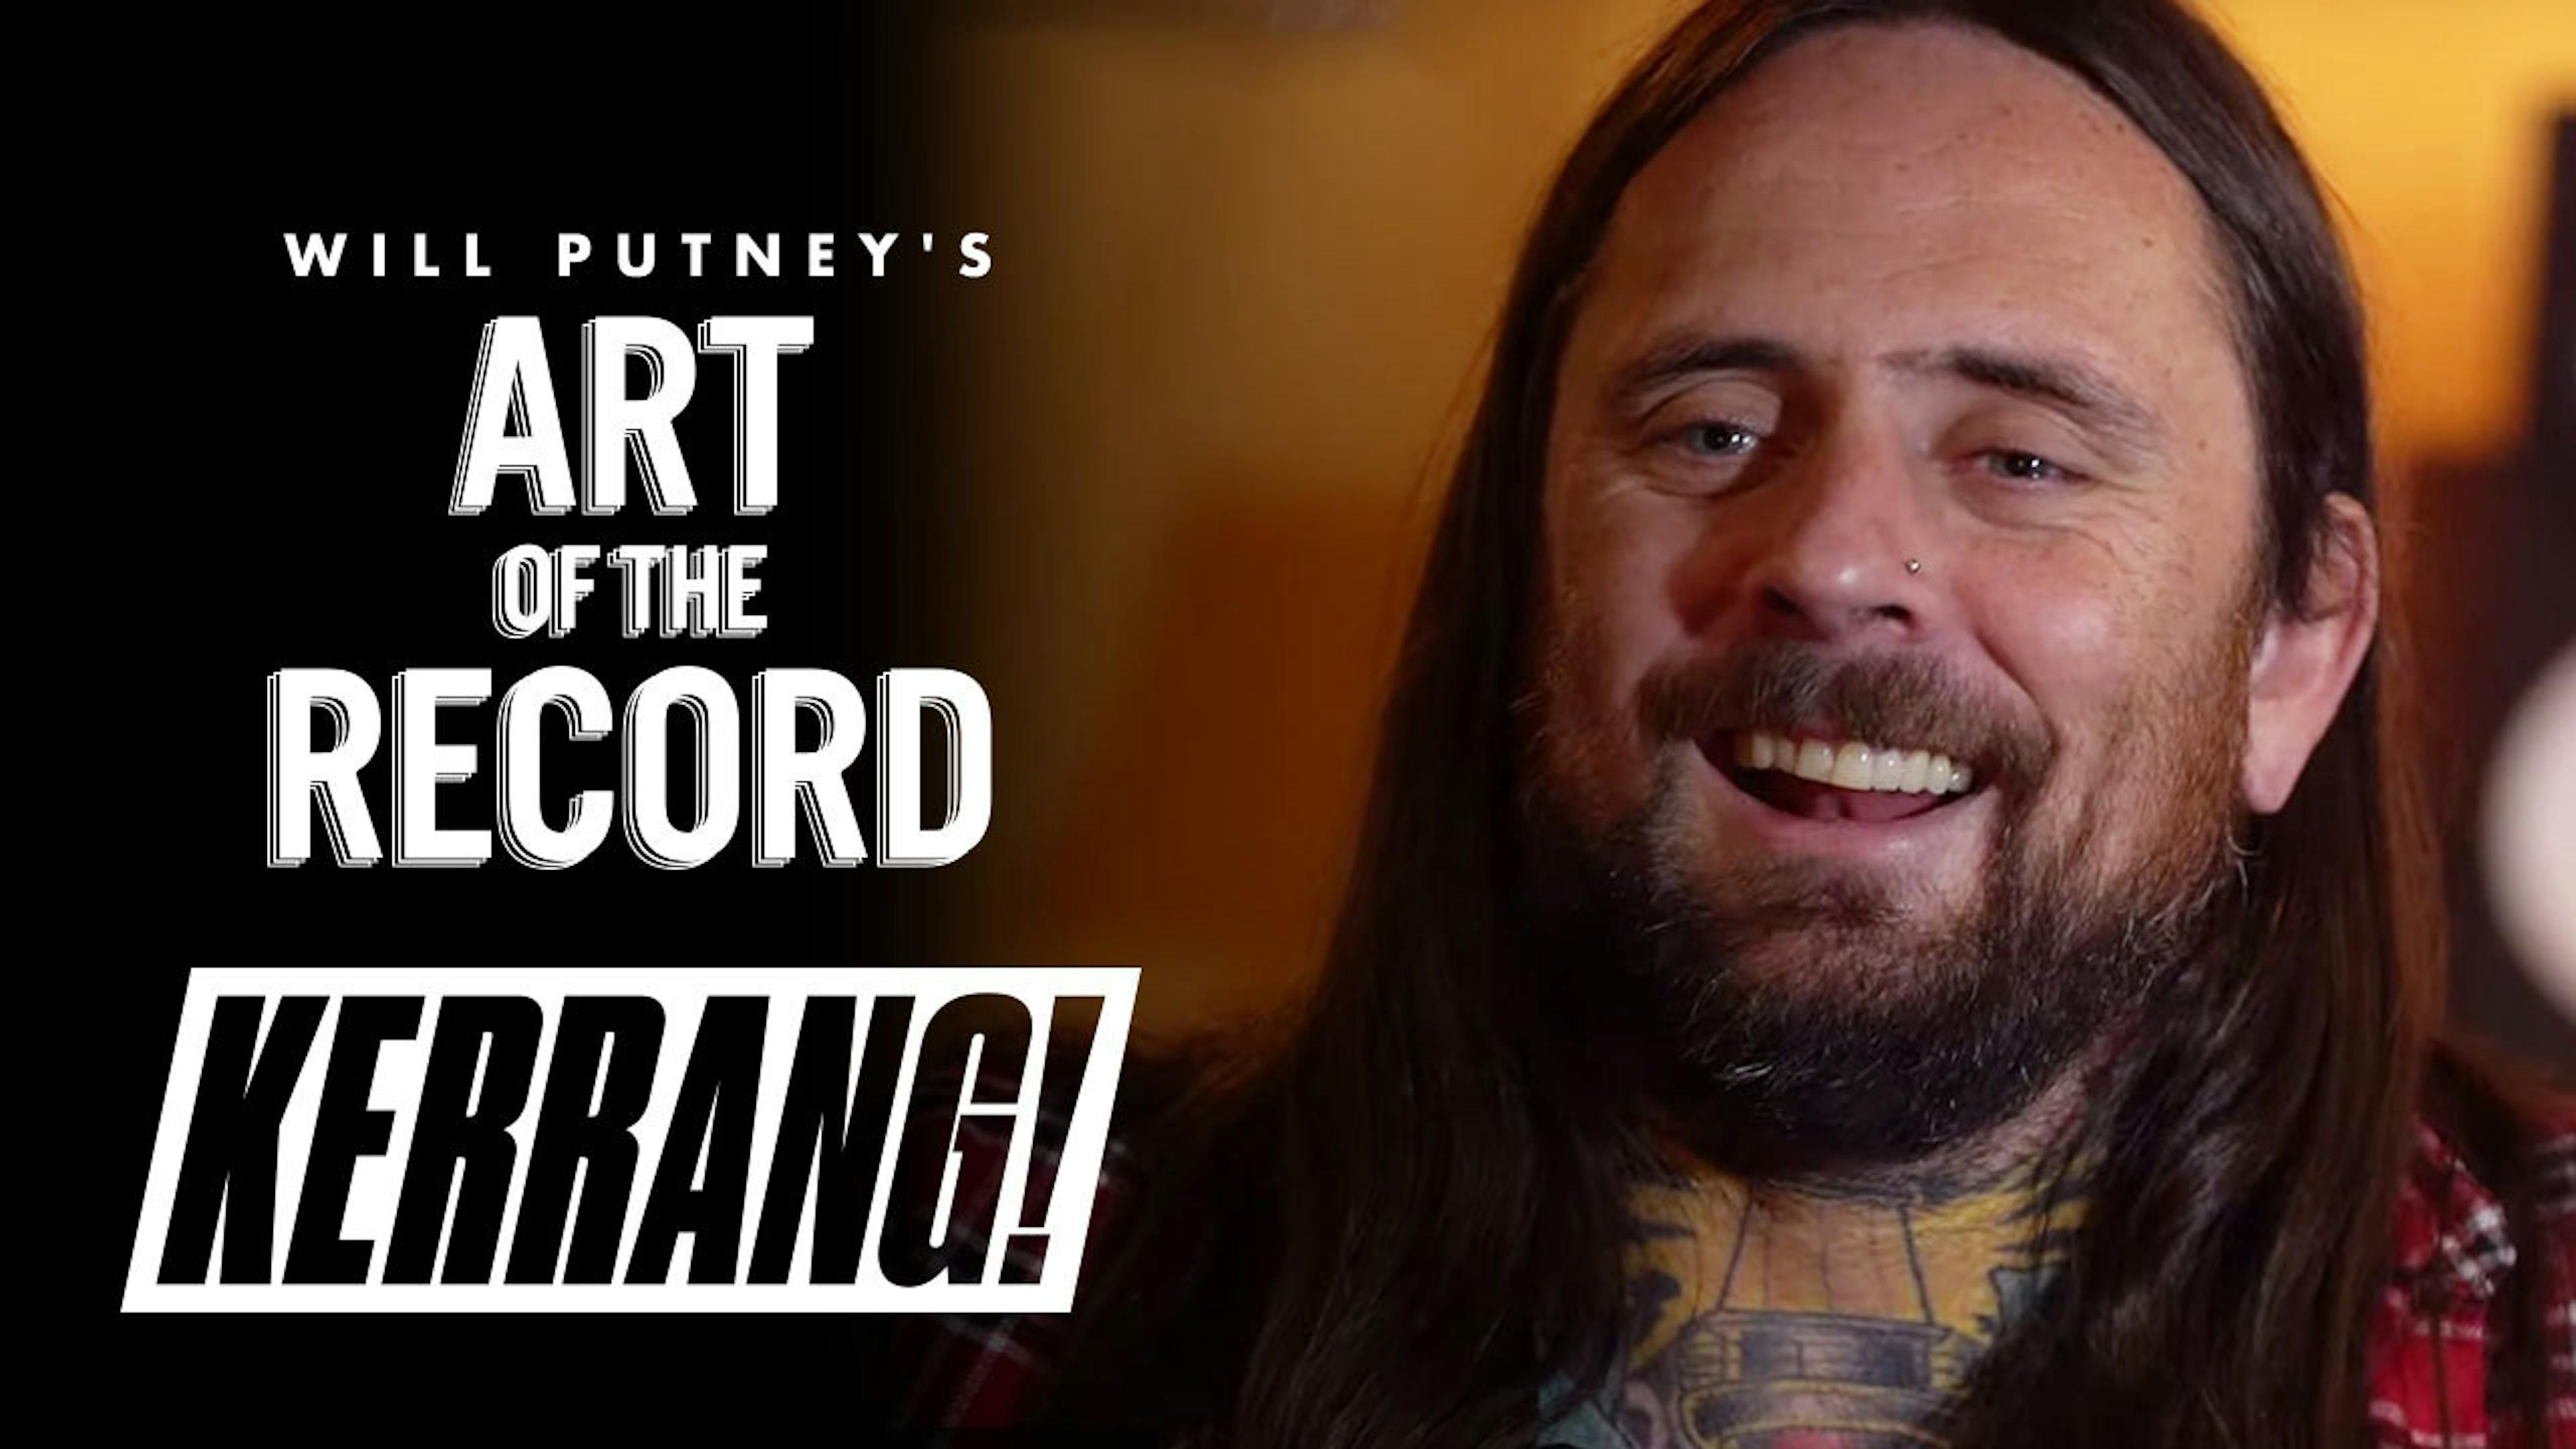 Producer Will Putney Reveals The Art Of Recording Vocals With Thy Art Is Murder’s CJ McMahon